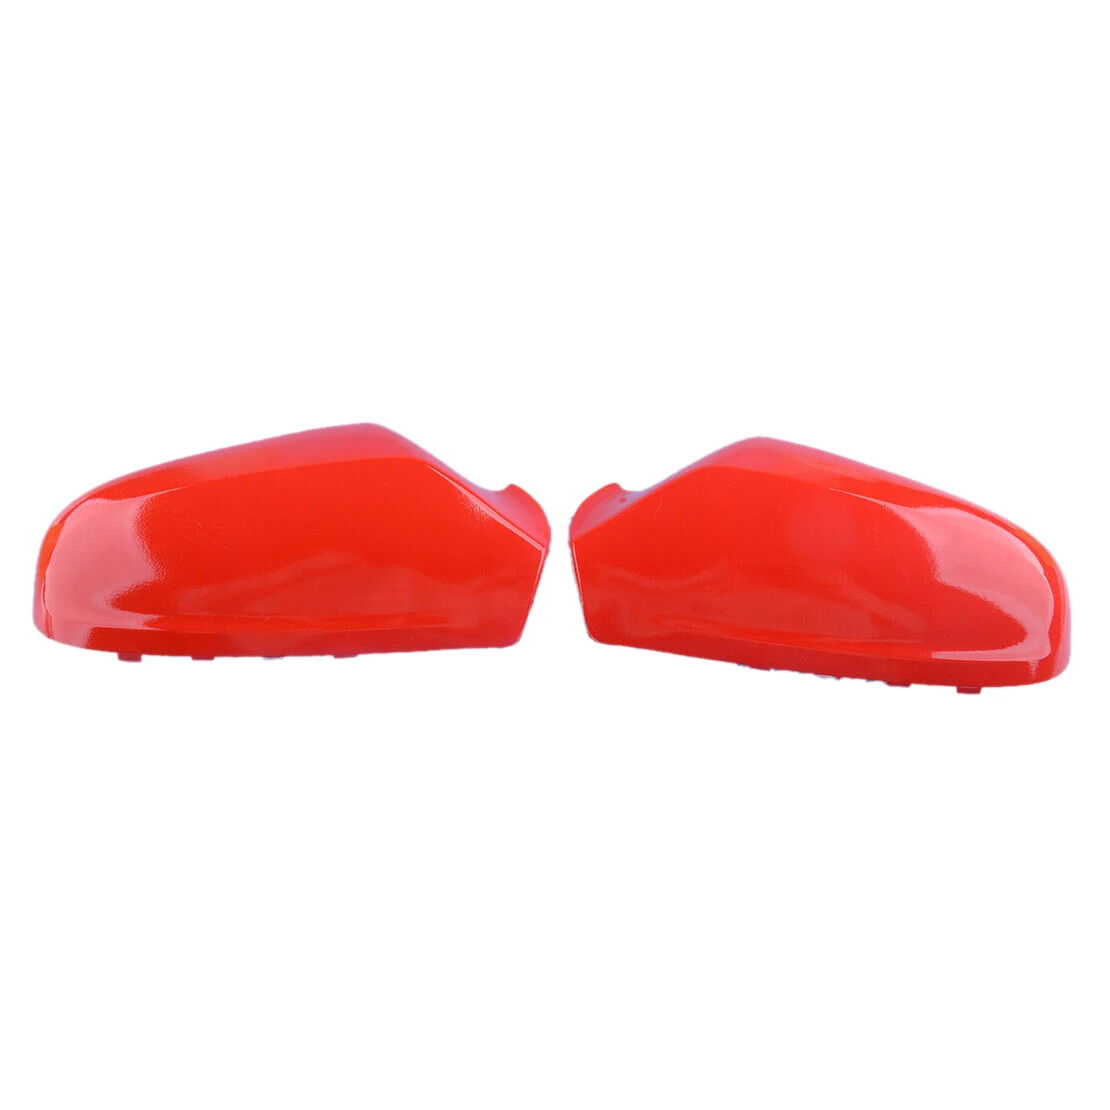 2 Pcs Side Door Wing Rear View Mirror Cover ​for Vauxhall Opel Astra H MK5 2004-2013 Red